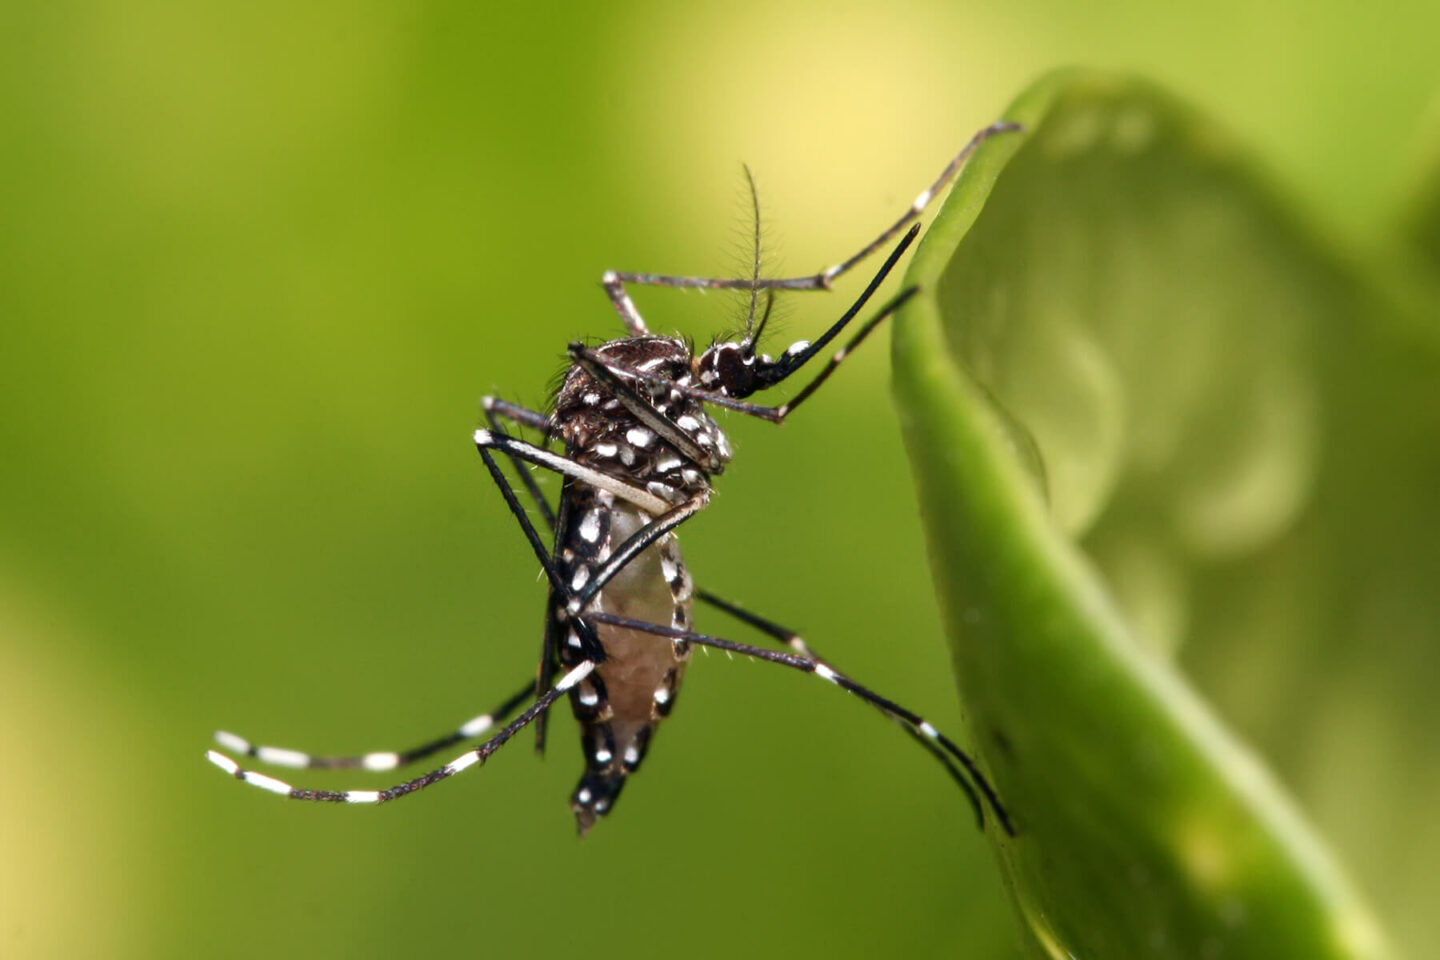 Aedes aegypti wikimedia commons 1